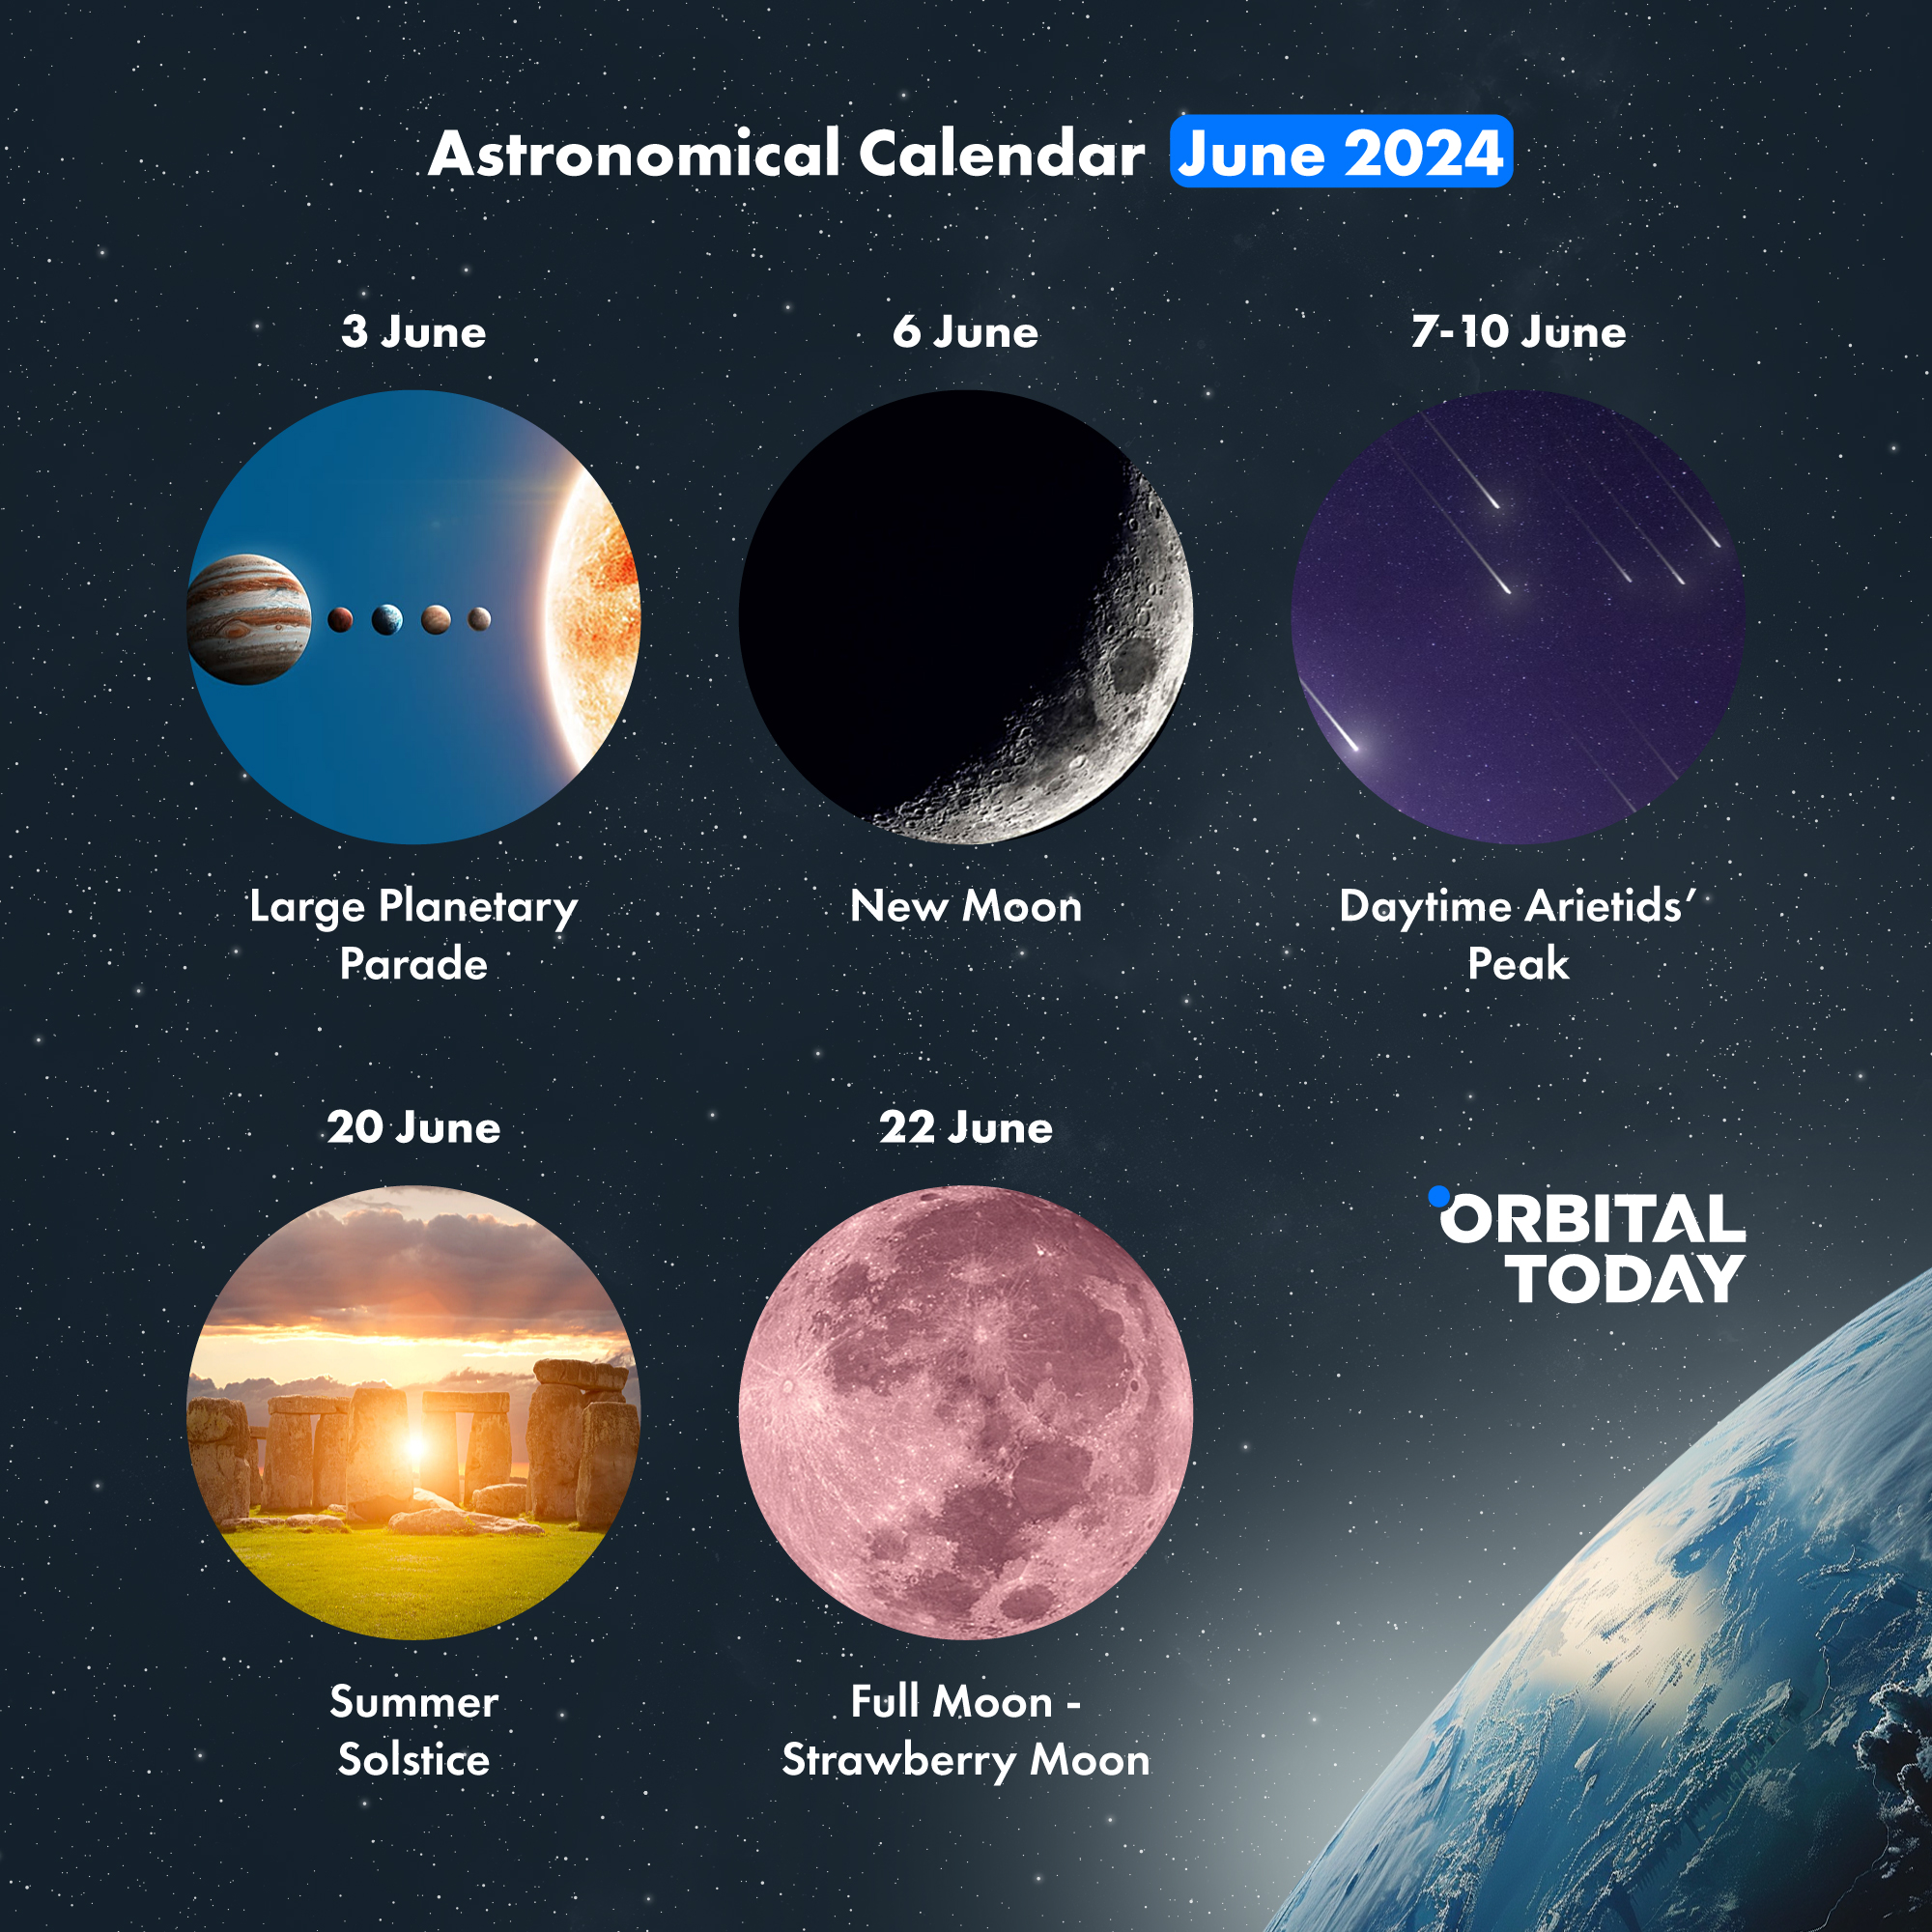 Your Astronomical Calendar to All Sky Spectacles in June 2024